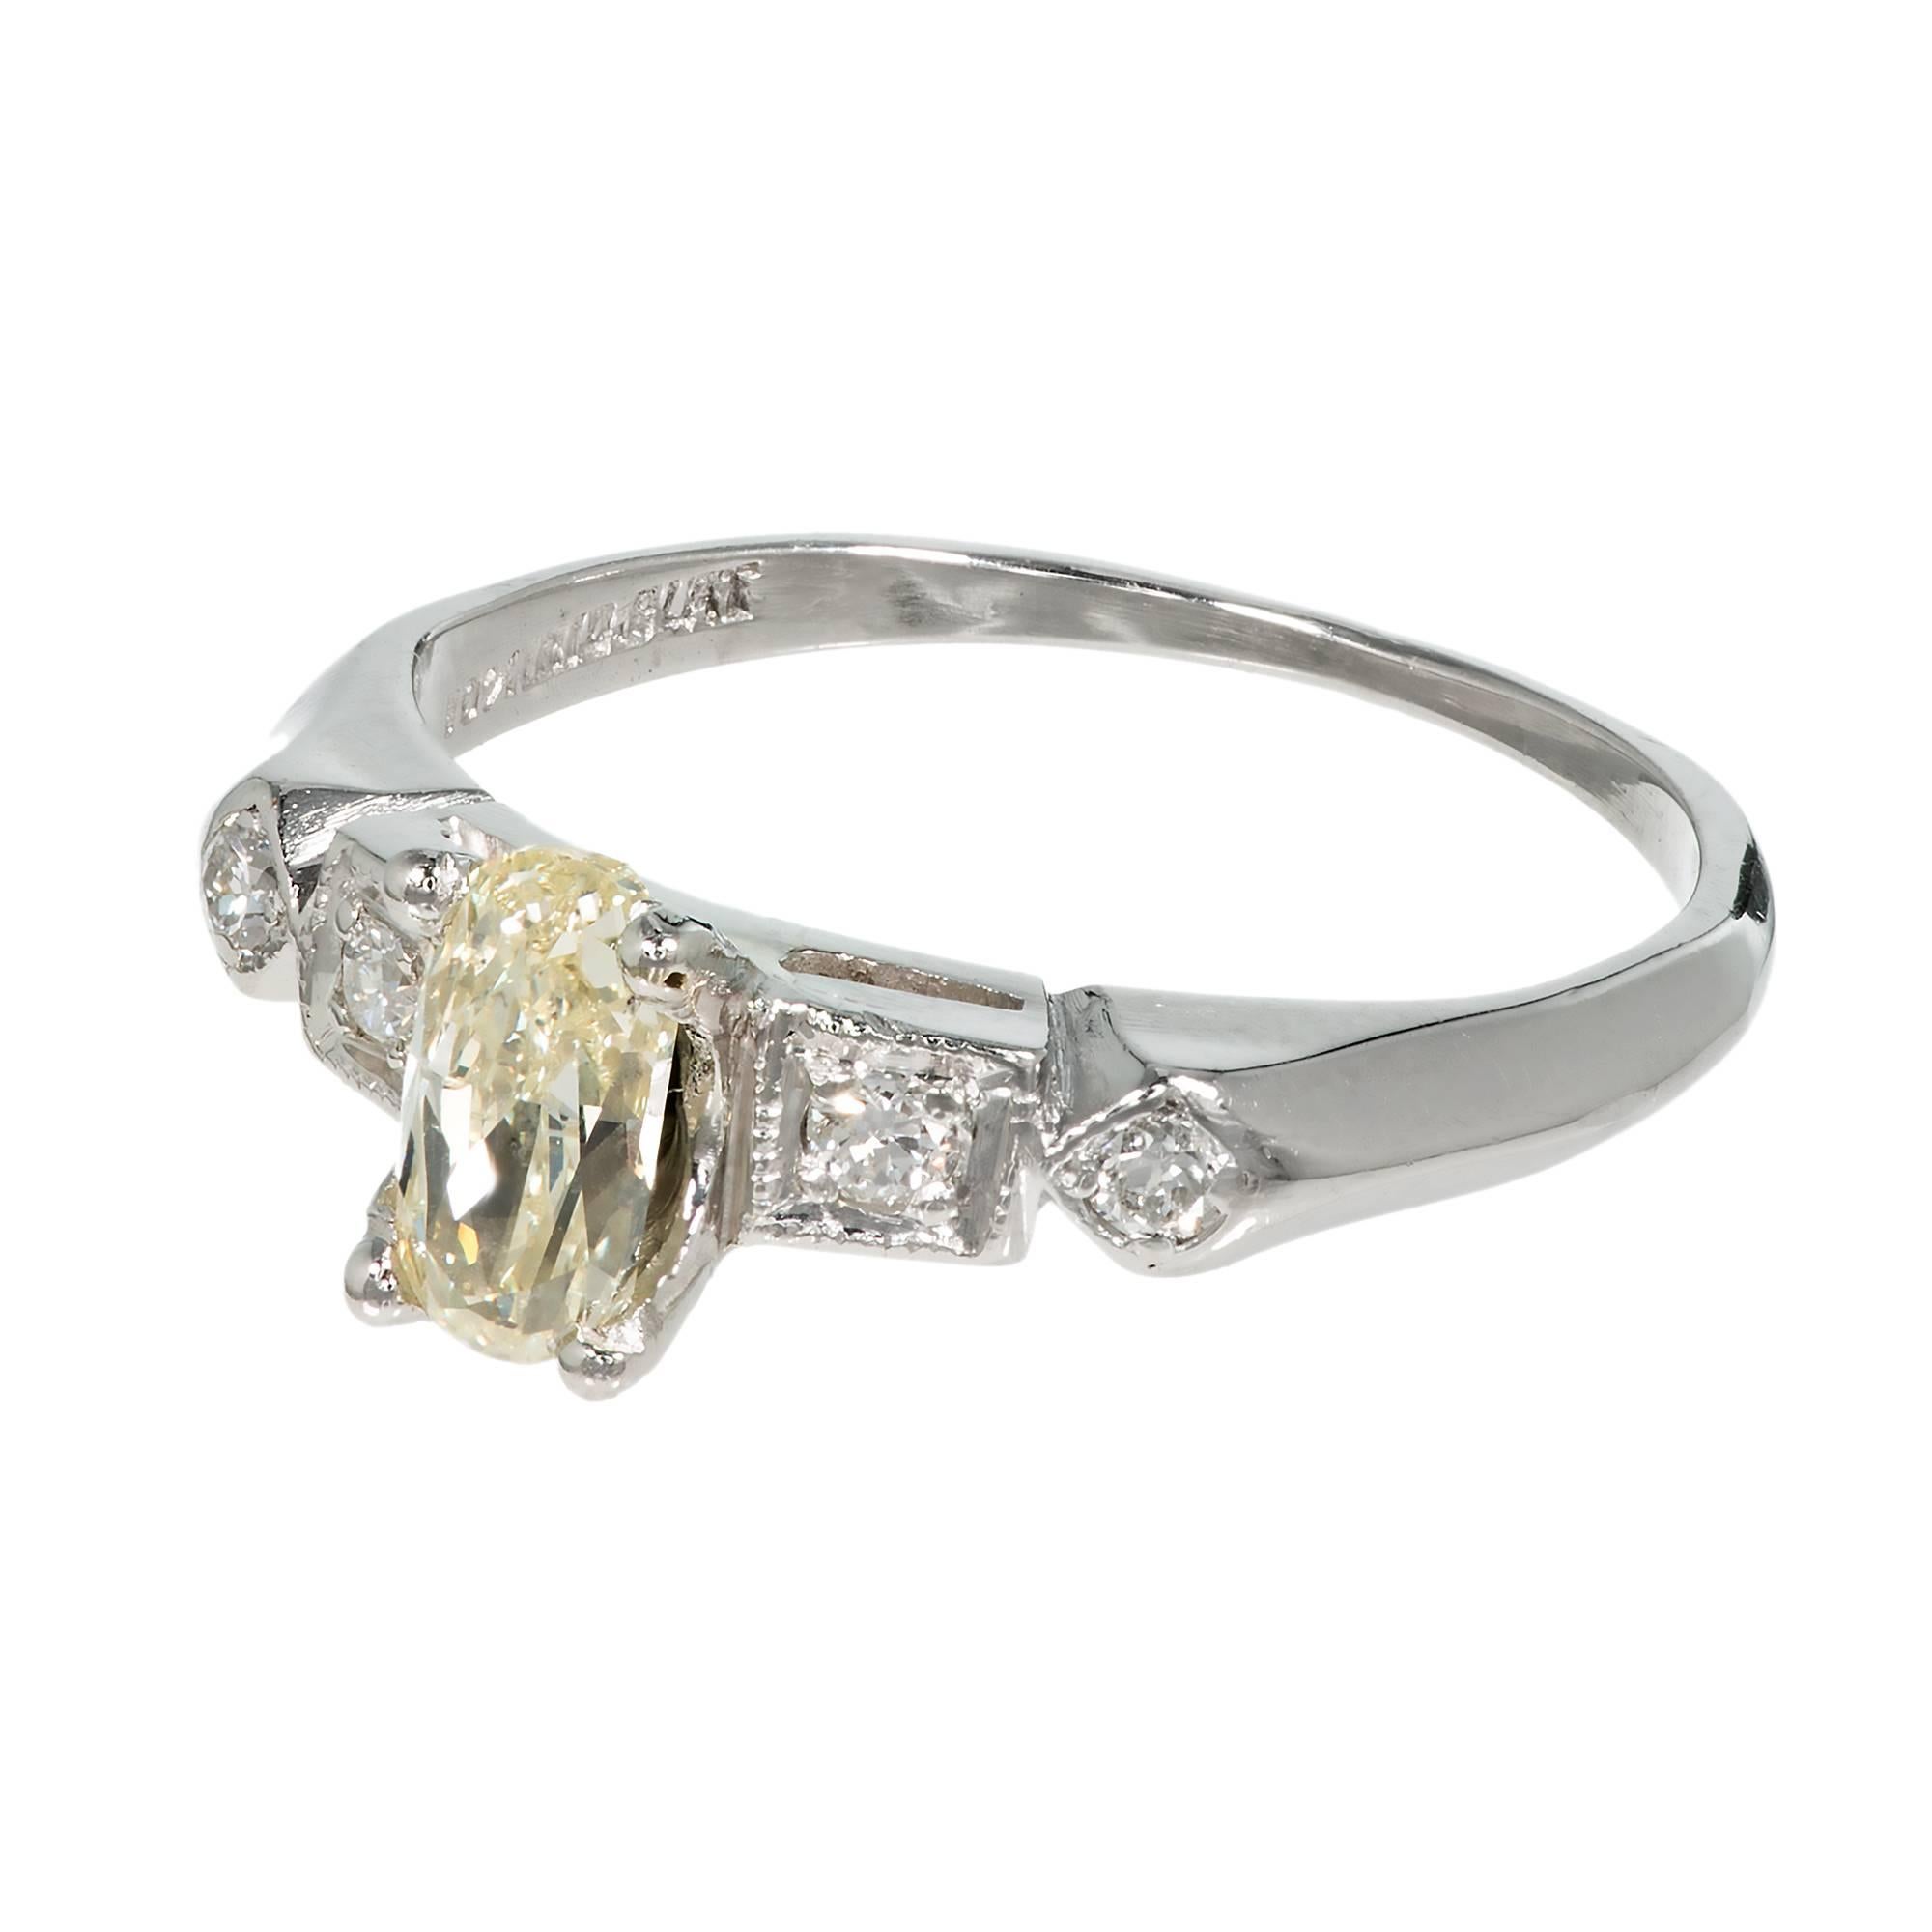 Original Art Deco 1930s light yellow diamond engagement ring. GIA certified natural yellow diamond center stone with 4 round accent diamonds in a platinum setting.  

1 oval light yellow diamond, approx. total weight .57cts, W-X, SI2, 6.64 x 3.49 x